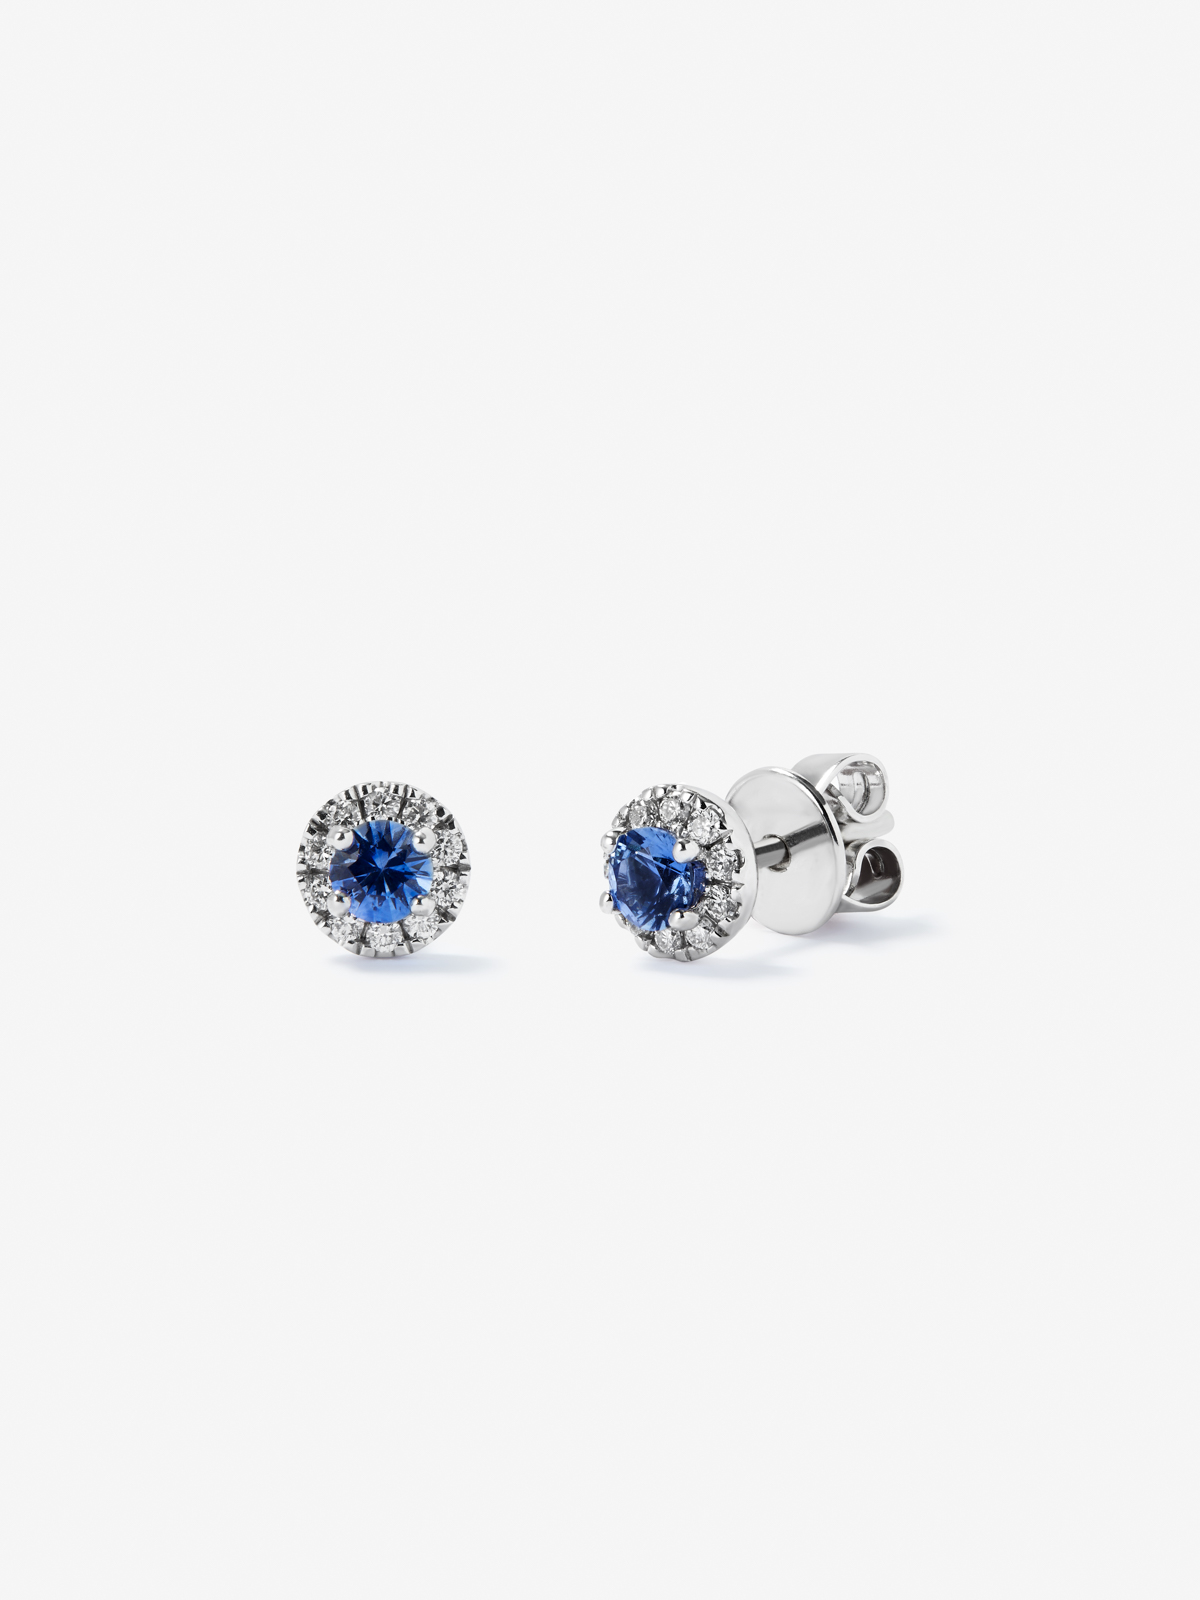 18K white gold earrings with blue zafiros in bright size of 0.36 cts and white diamonds in bright size of 0.15 cts